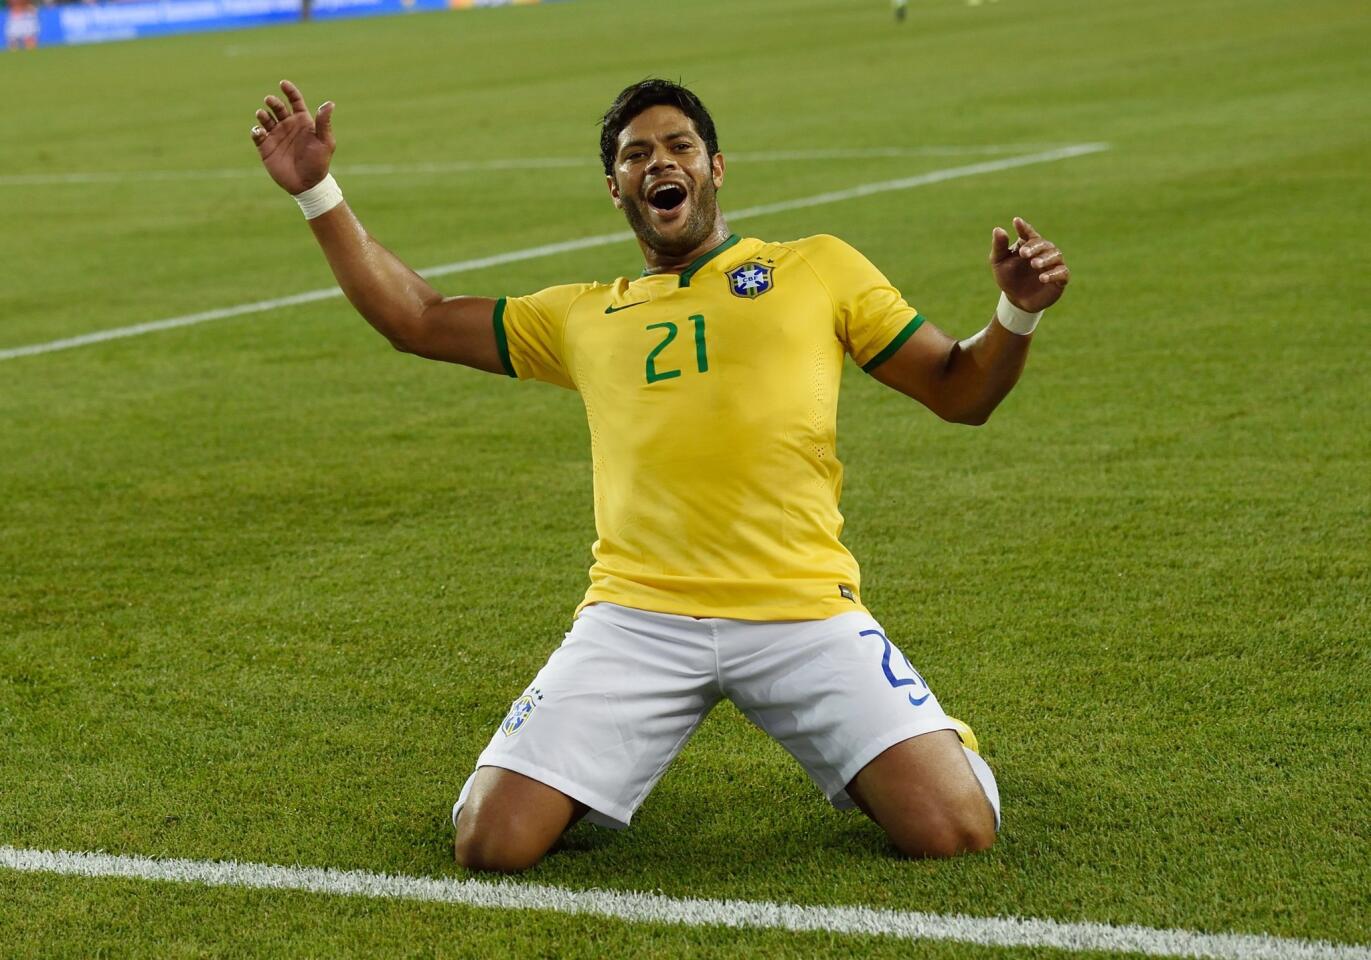 Brazil's Hulk (21) celebrates after scoring a goal during the friendly match between the USA and Brazil September 8, 2015 at Gillette Stadium in Foxborough, Massachusetts. AFP PHOTO/DON EMMERTDON EMMERT/AFP/Getty Images ** OUTS - ELSENT, FPG - OUTS * NM, PH, VA if sourced by CT, LA or MoD **